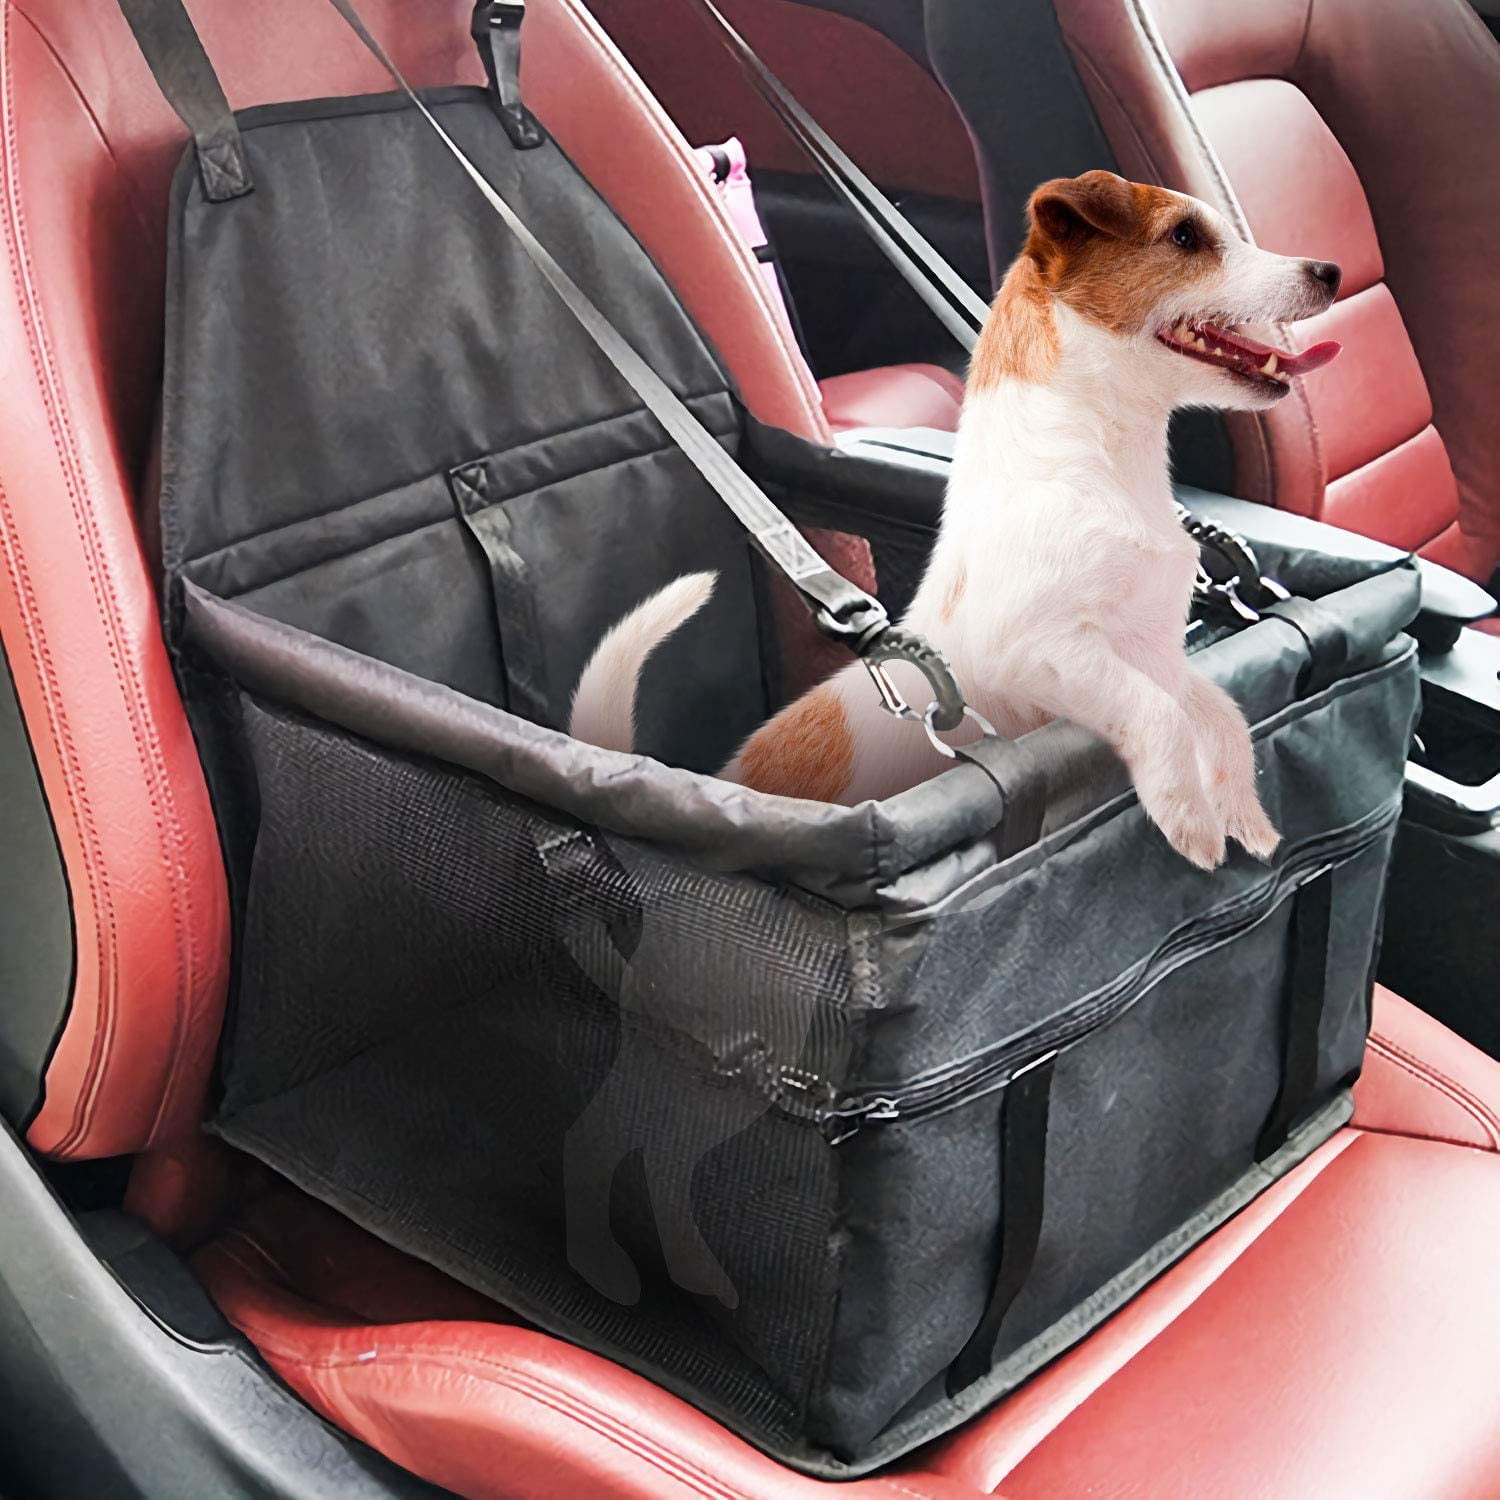 Housse Voiture Chien Protection Voiture Chien Puppy Car Seat Dog Travel Carrier Dogs Accessories Pet Car Seat Dog Hammock for Car Dog Booster Seat Blue 